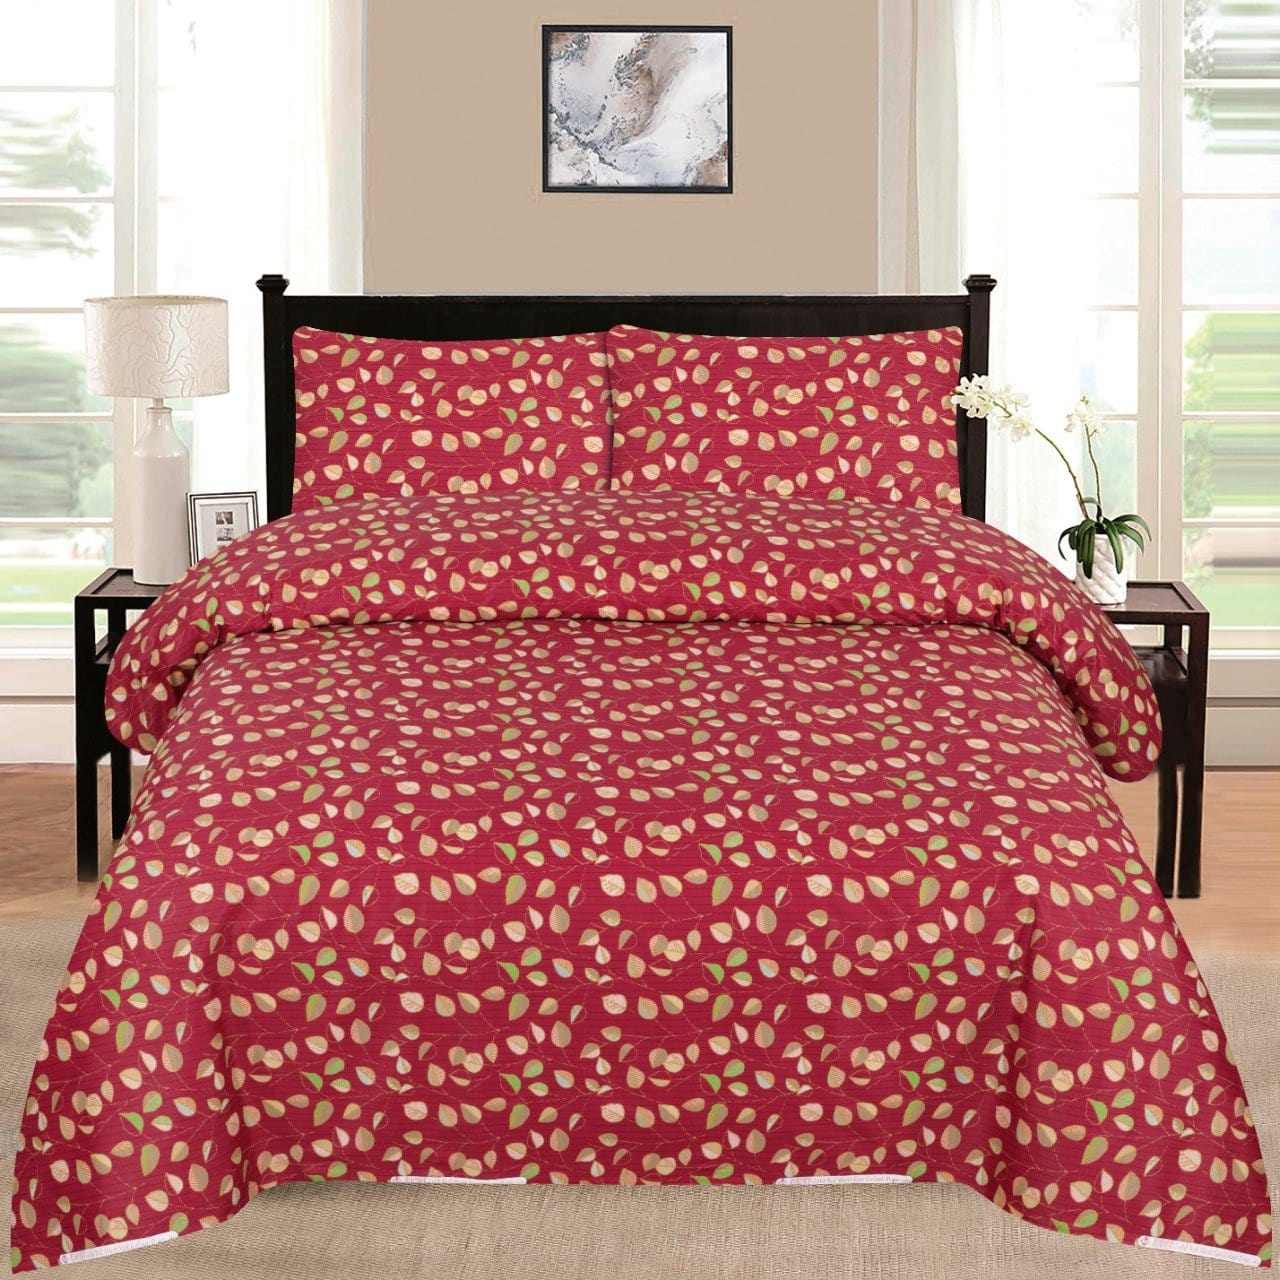 Tulip D645 -Cotton PC King Size Bedsheet with 2 Pillow Covers.